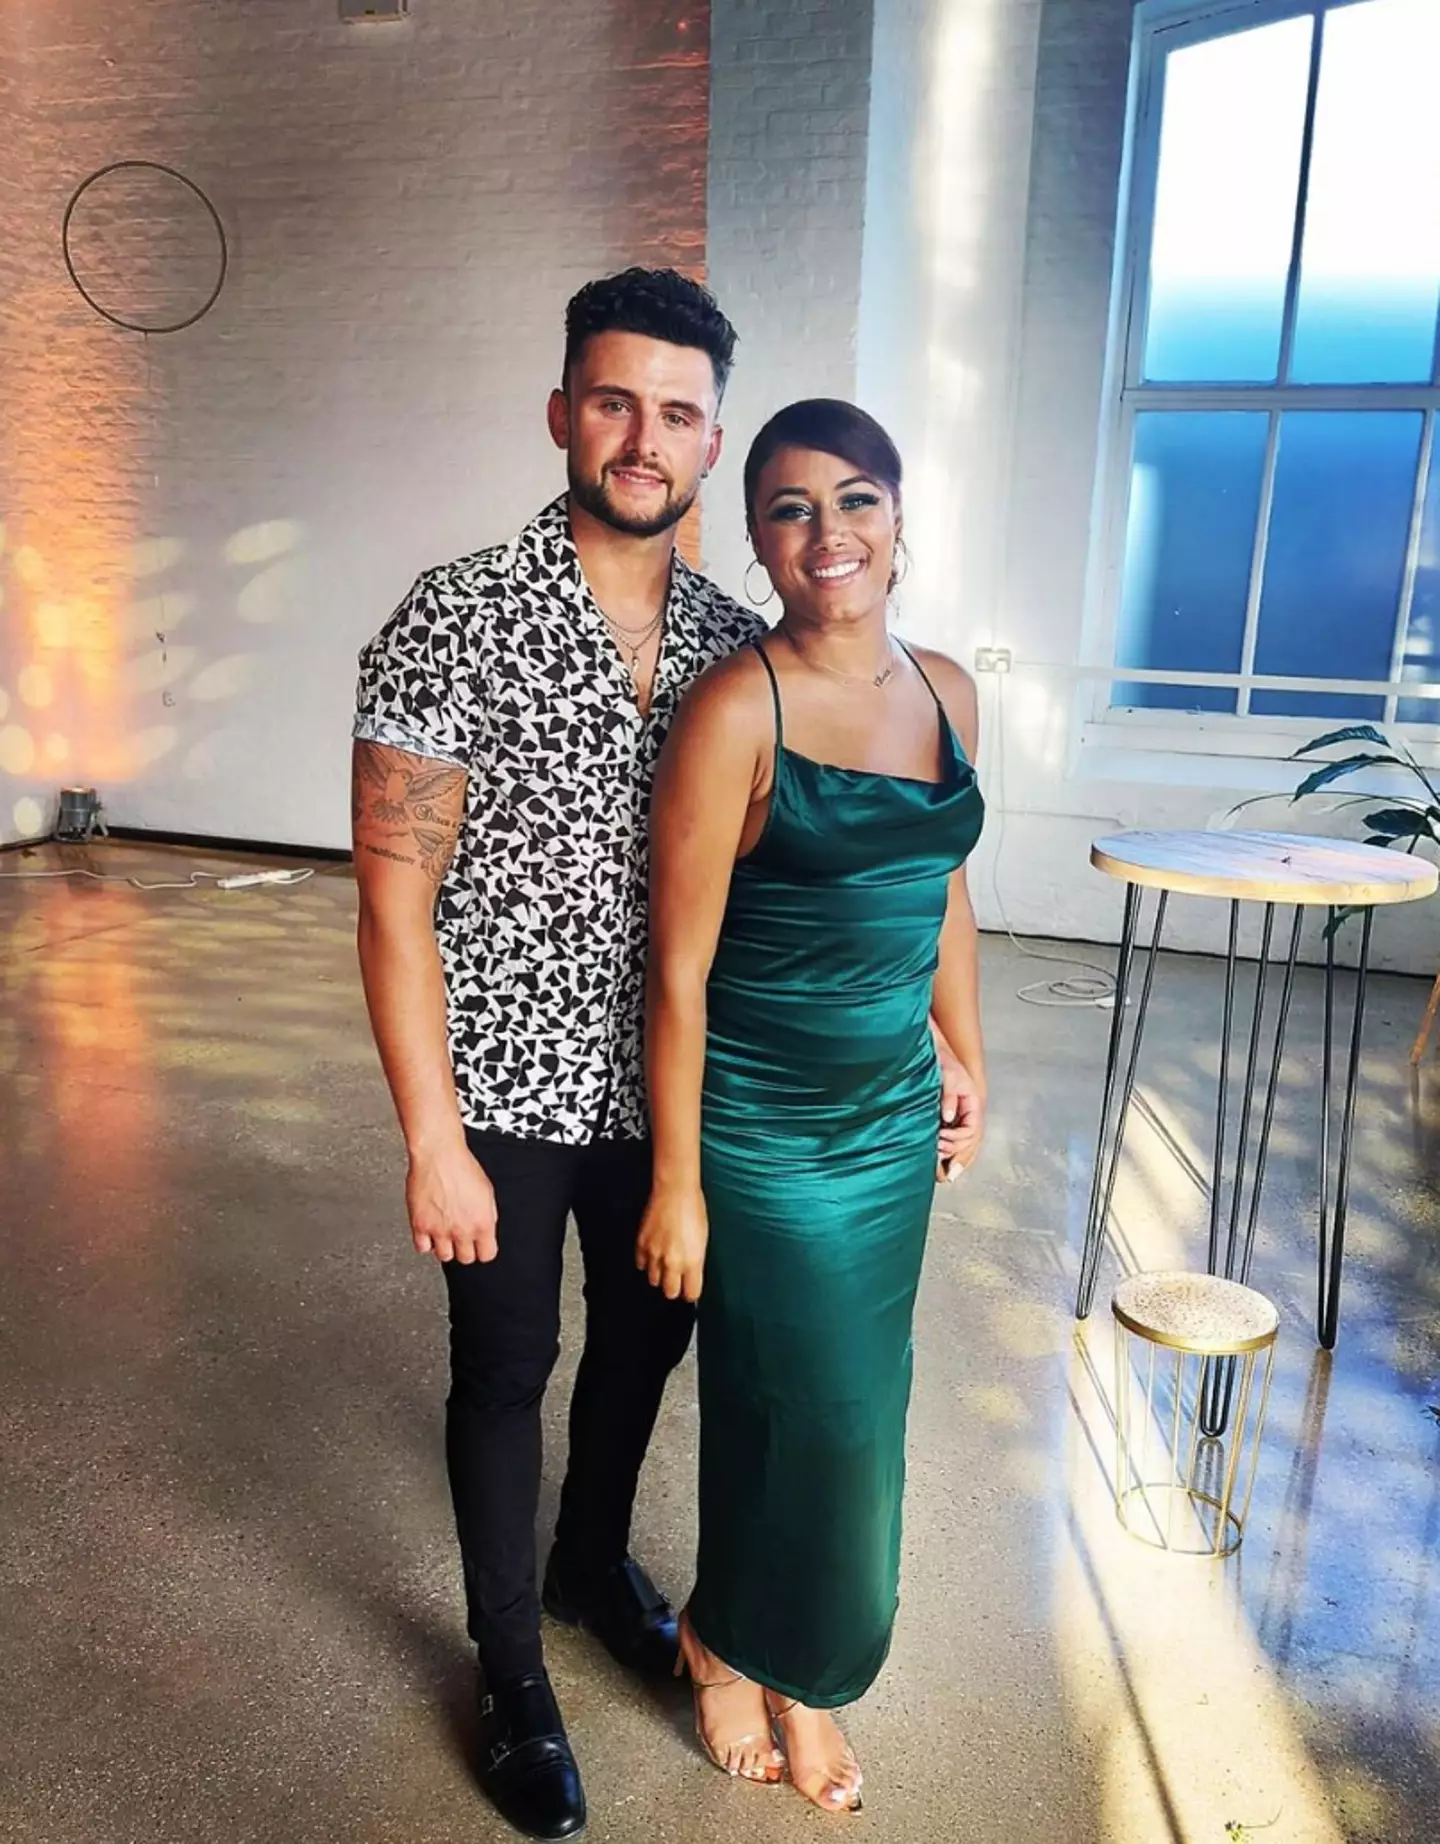 Married at First Sight UK stars Jordan Emmett-Connelly and Chanita Stephenson have split, and things don’t exactly sound amicable.